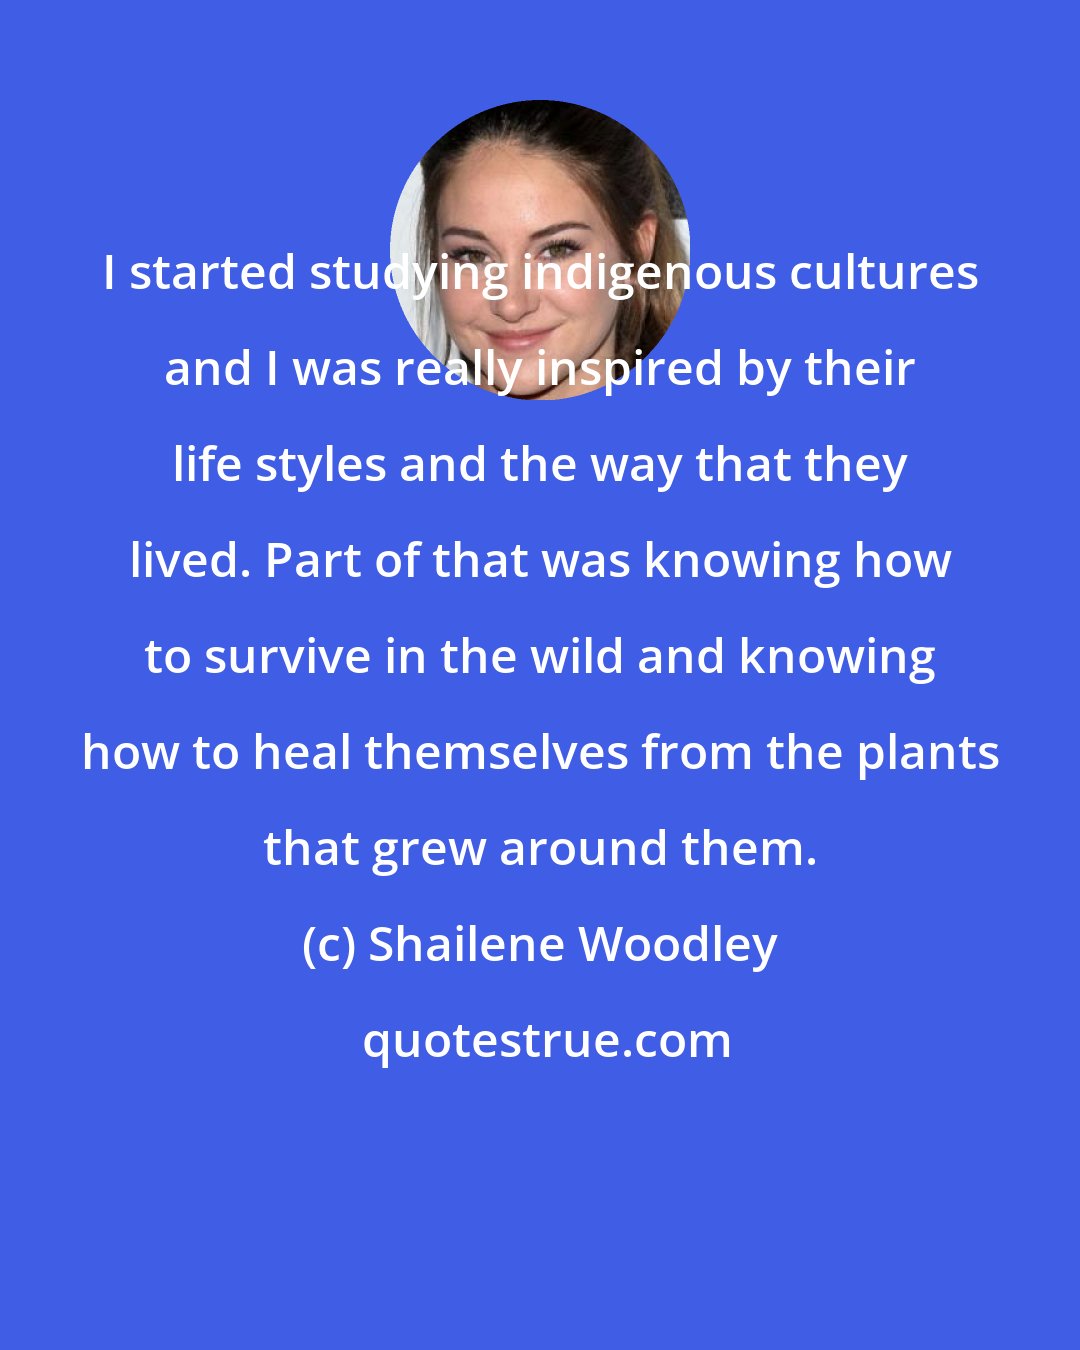 Shailene Woodley: I started studying indigenous cultures and I was really inspired by their life styles and the way that they lived. Part of that was knowing how to survive in the wild and knowing how to heal themselves from the plants that grew around them.